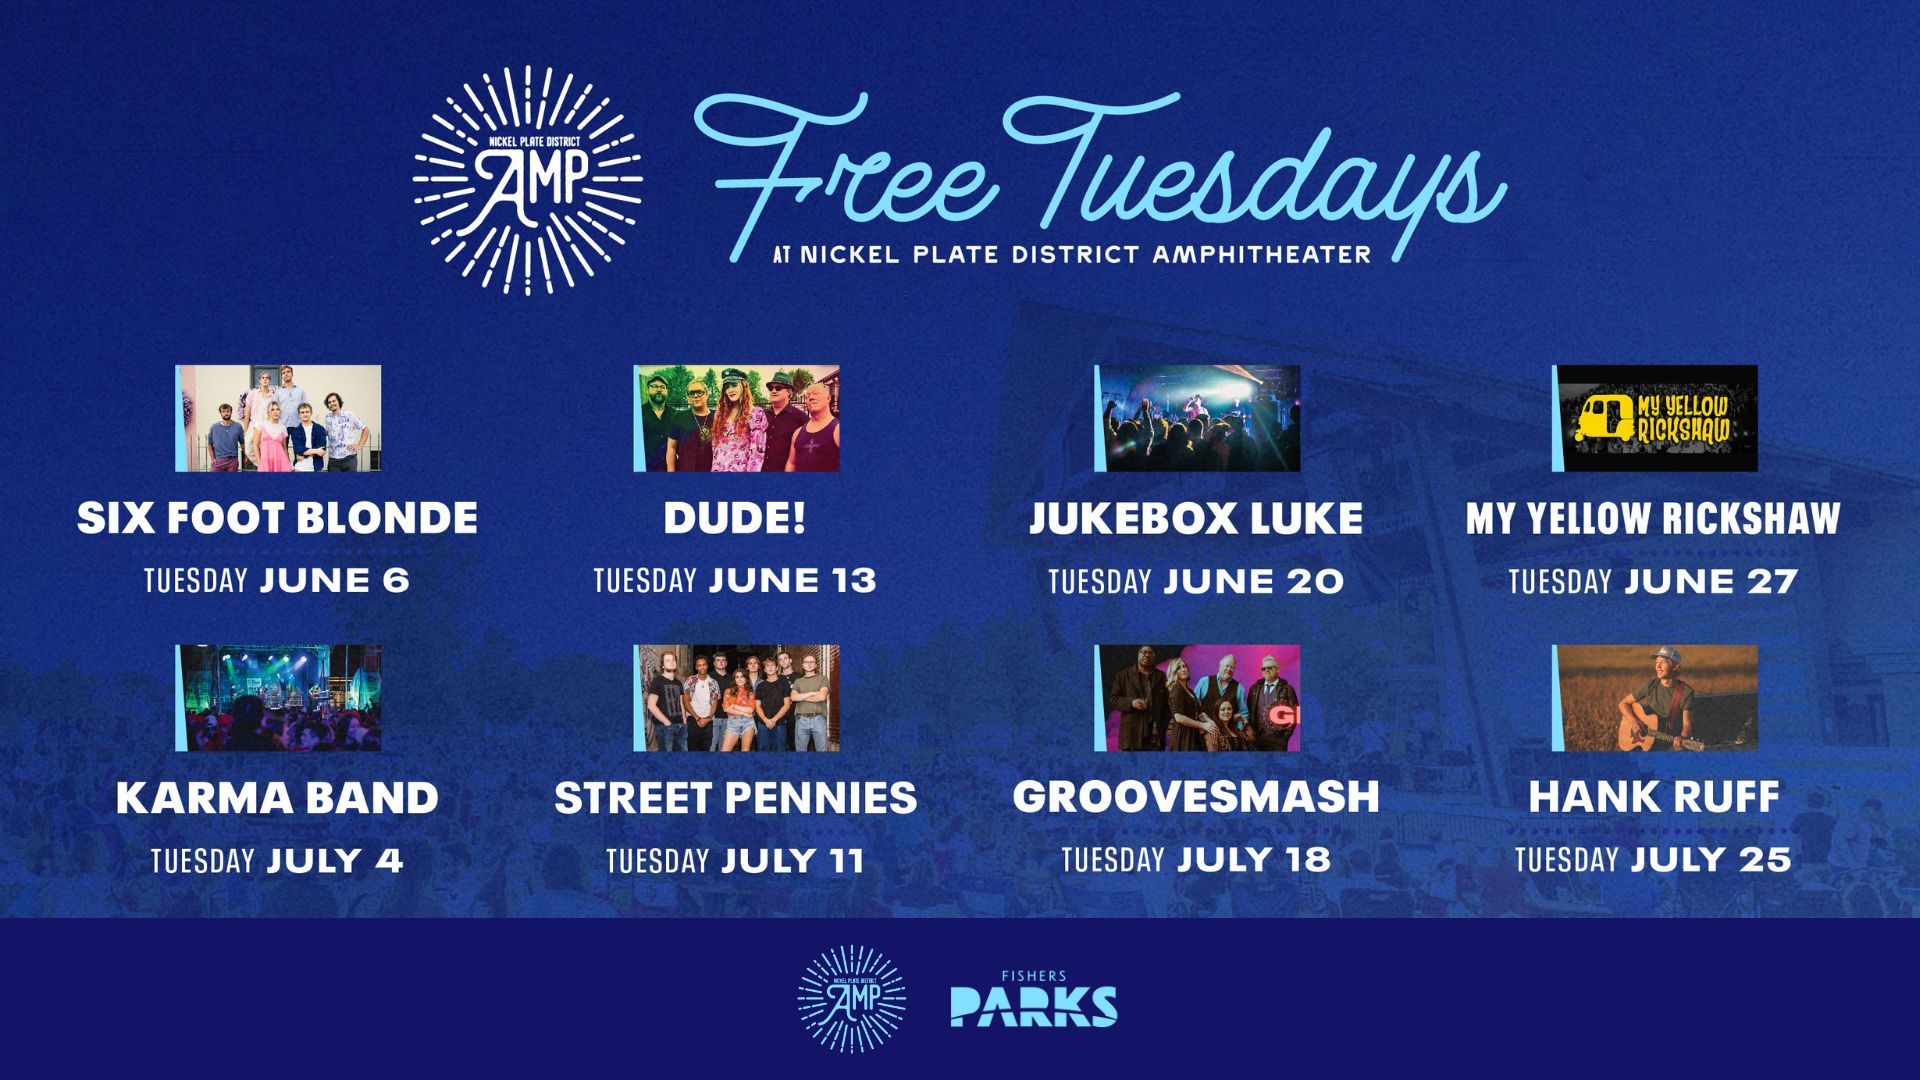 Free Tuesdays at Nickel Plate District Amphitheater Six Foot Blonde Tuesday June 6 DUDE! Tuesday June 13 Jukebox Luke Tuesday June 20 My Yellow Rickshaw Tuesday June 27 Karma Band Tuesday July 6 Street Pennies Tuesday July 11 Groovesmash Tuesday July 18 Hank Ruff Tuesday July 25